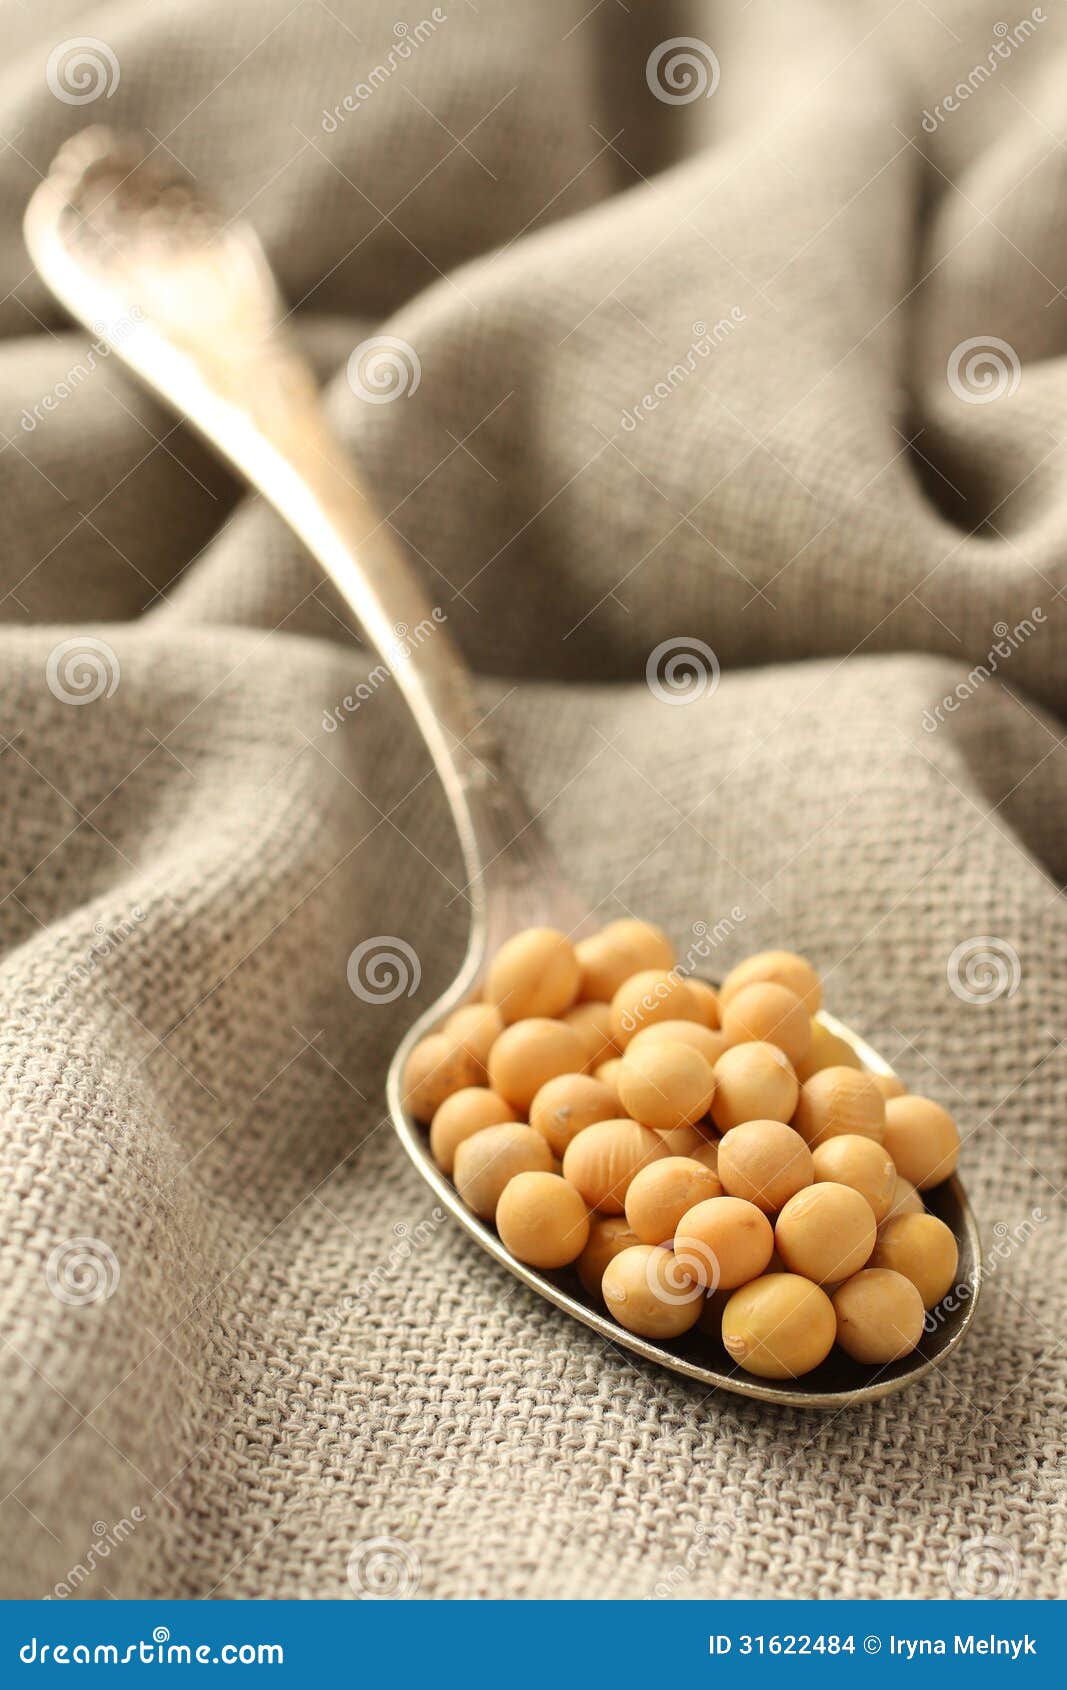 soybeans in metal spoon on sackcloth background